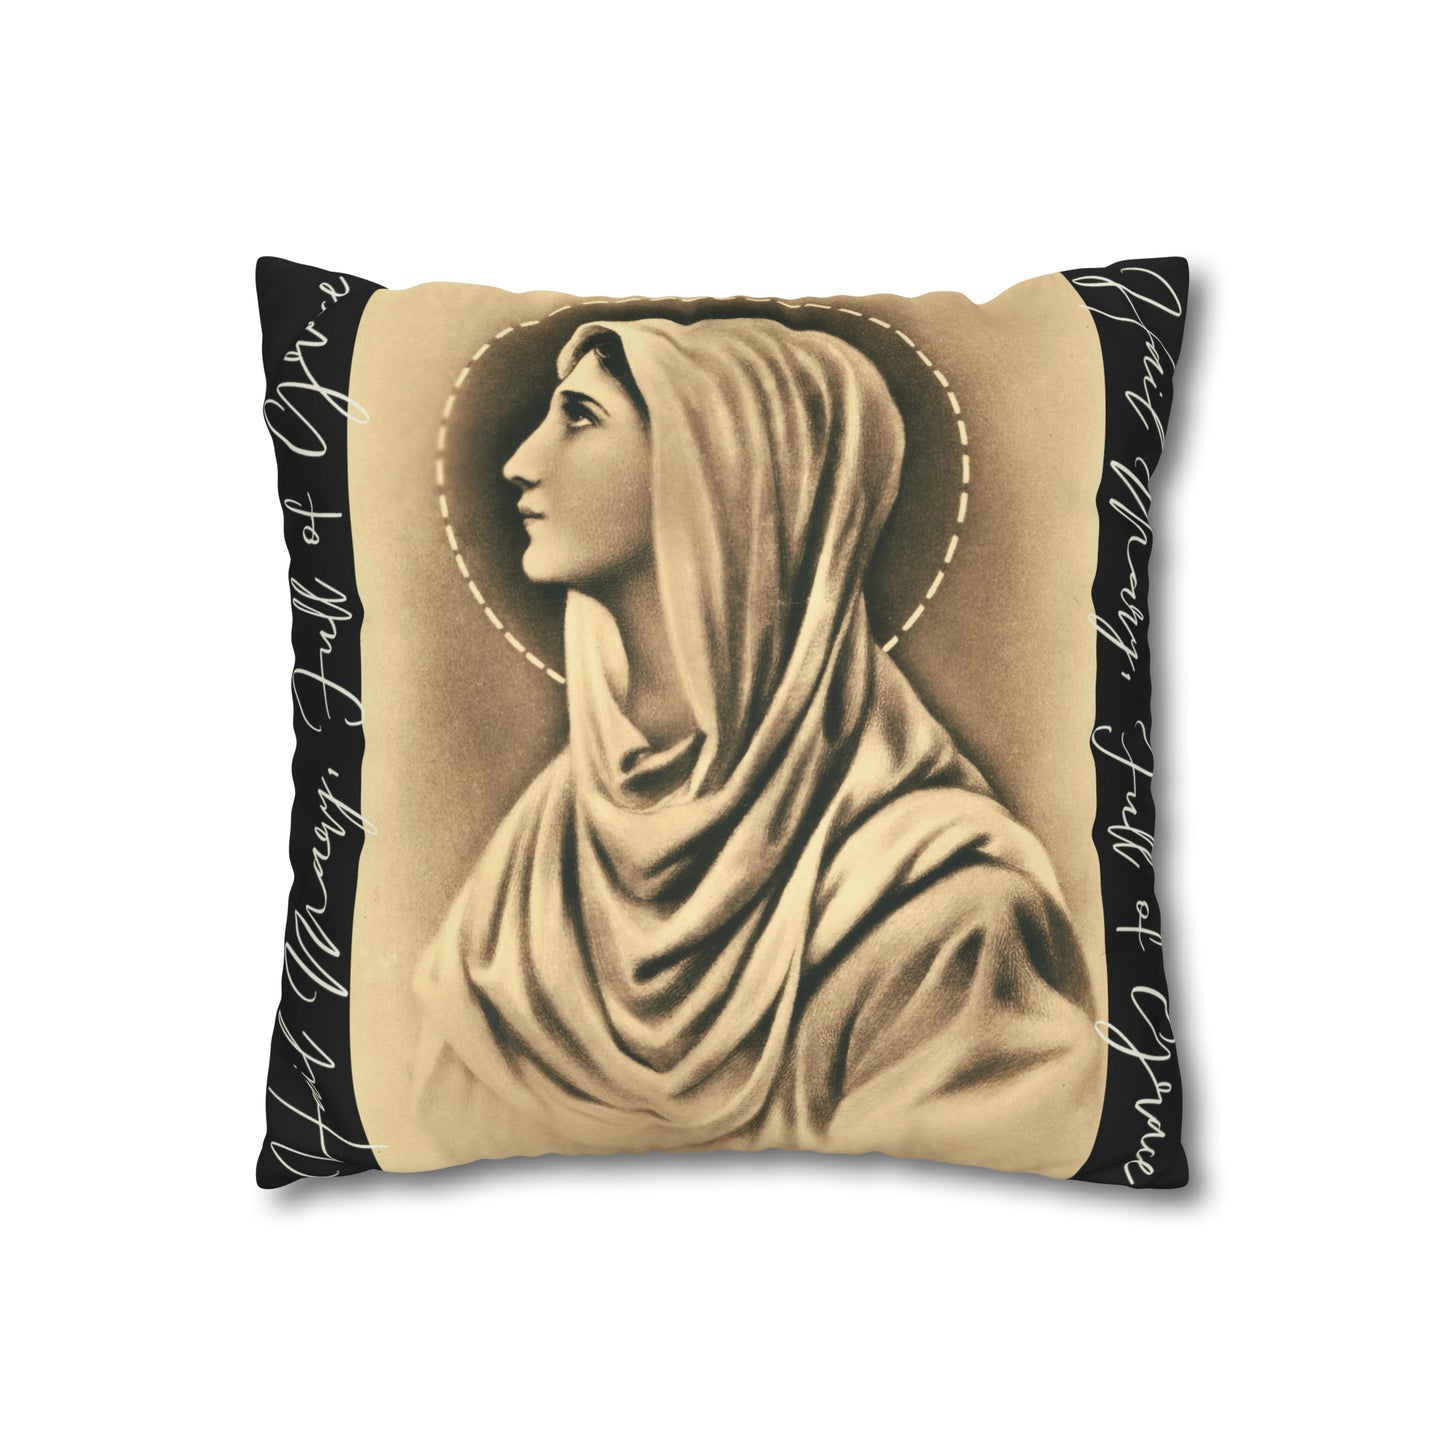 Hail Mary Full of Grace - Faux Suede Square Pillow Case - Studio Lams Creative Collective